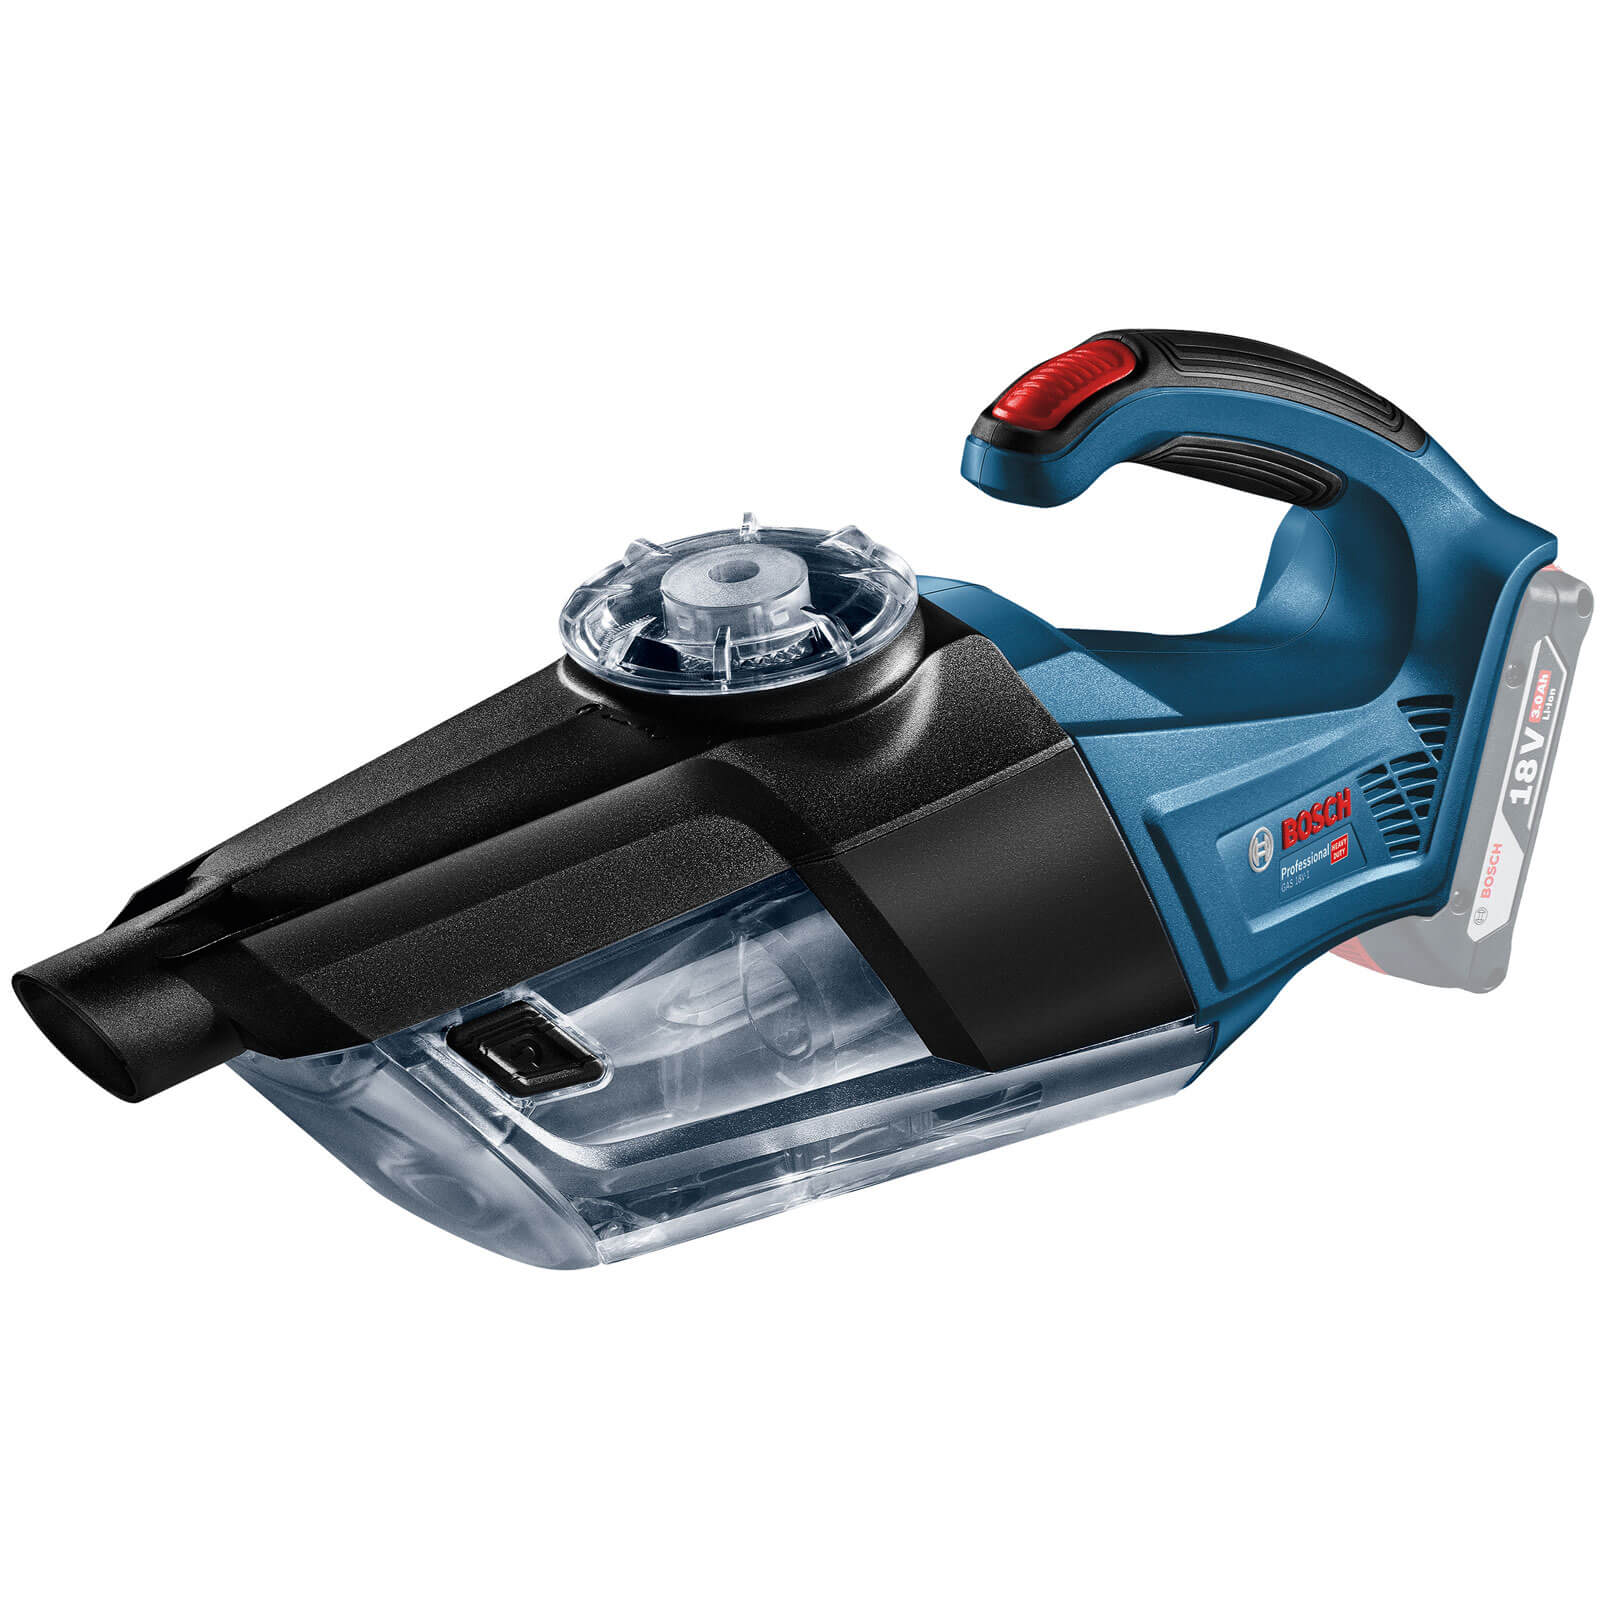 Image of Bosch GAS 18 V-1 18v Cordless Hand Held Vacuum Cleaner No Batteries No Charger No Case